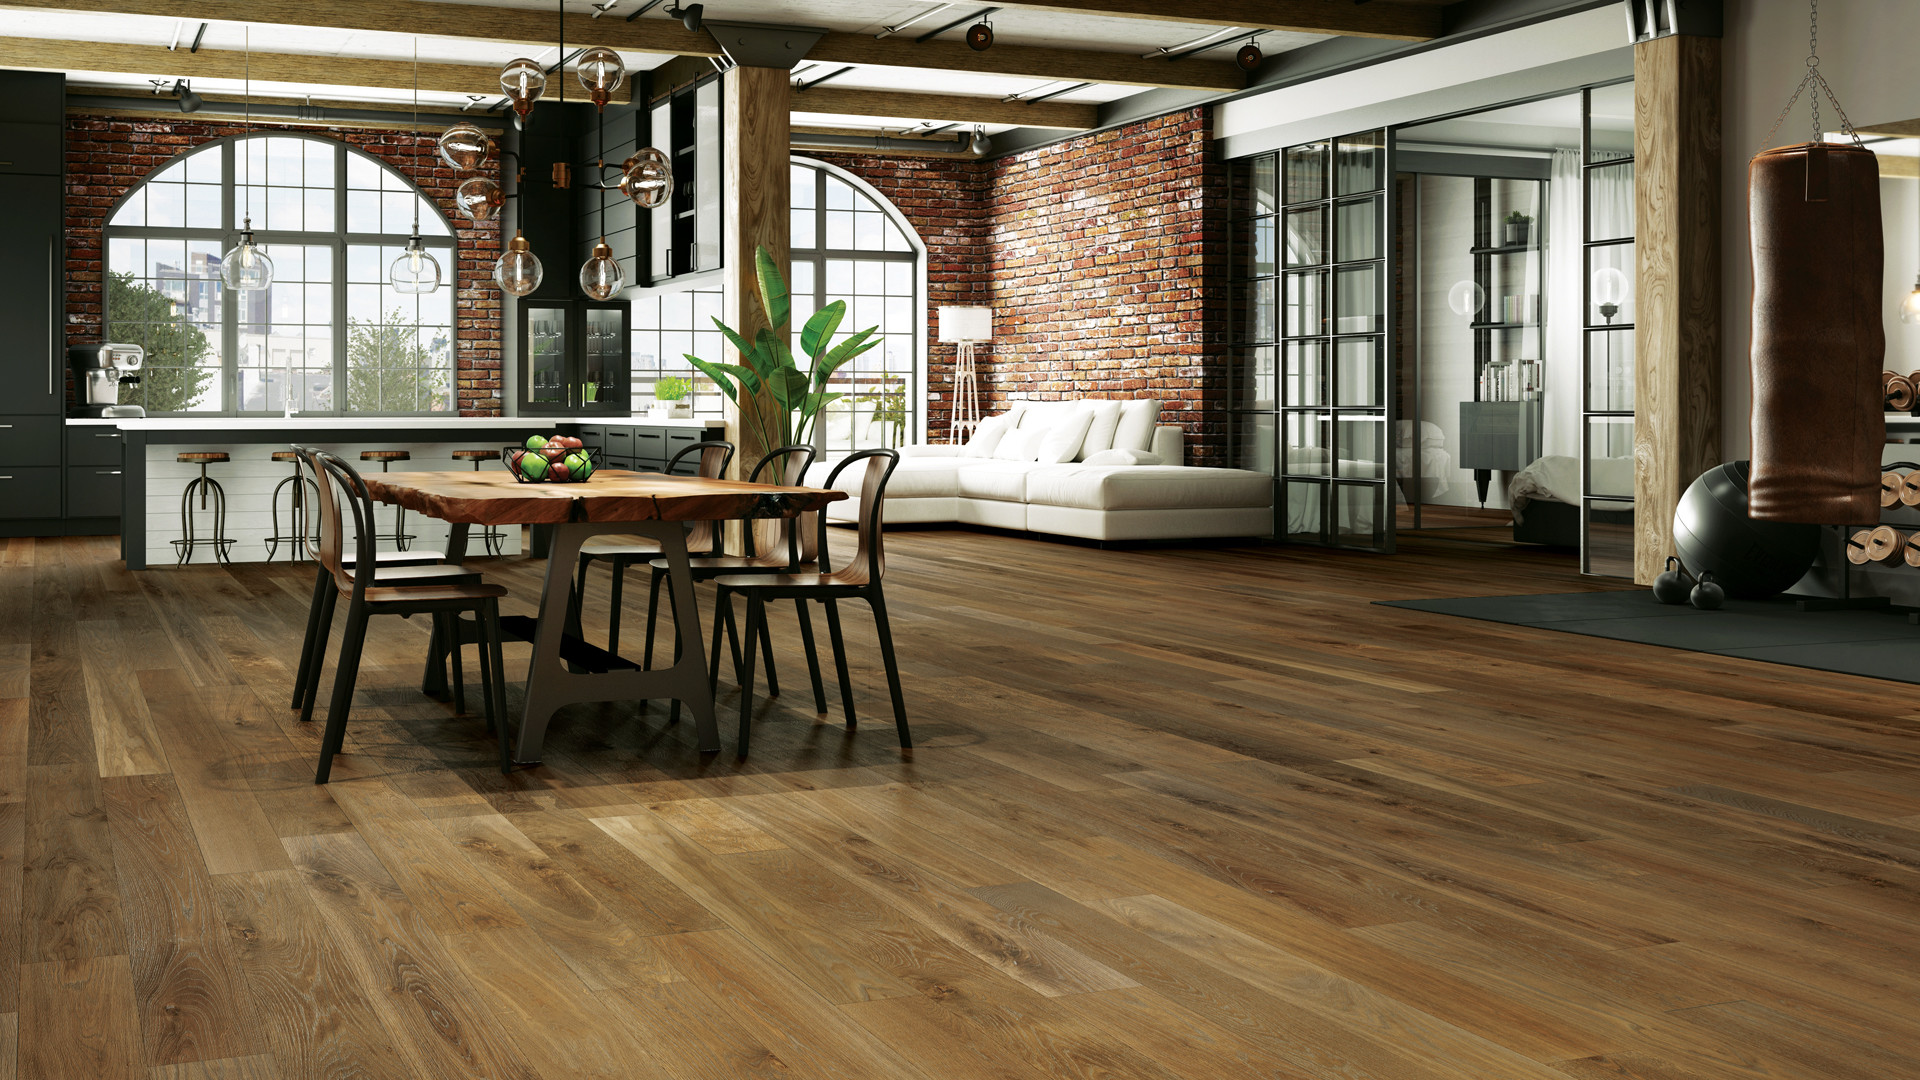 11 Perfect Oak or Maple Hardwood Floors which is Better 2024 free download oak or maple hardwood floors which is better of 4 latest hardwood flooring trends of 2018 lauzon flooring throughout combined with a wire brushed texture and an ultra matte sheen these new 7